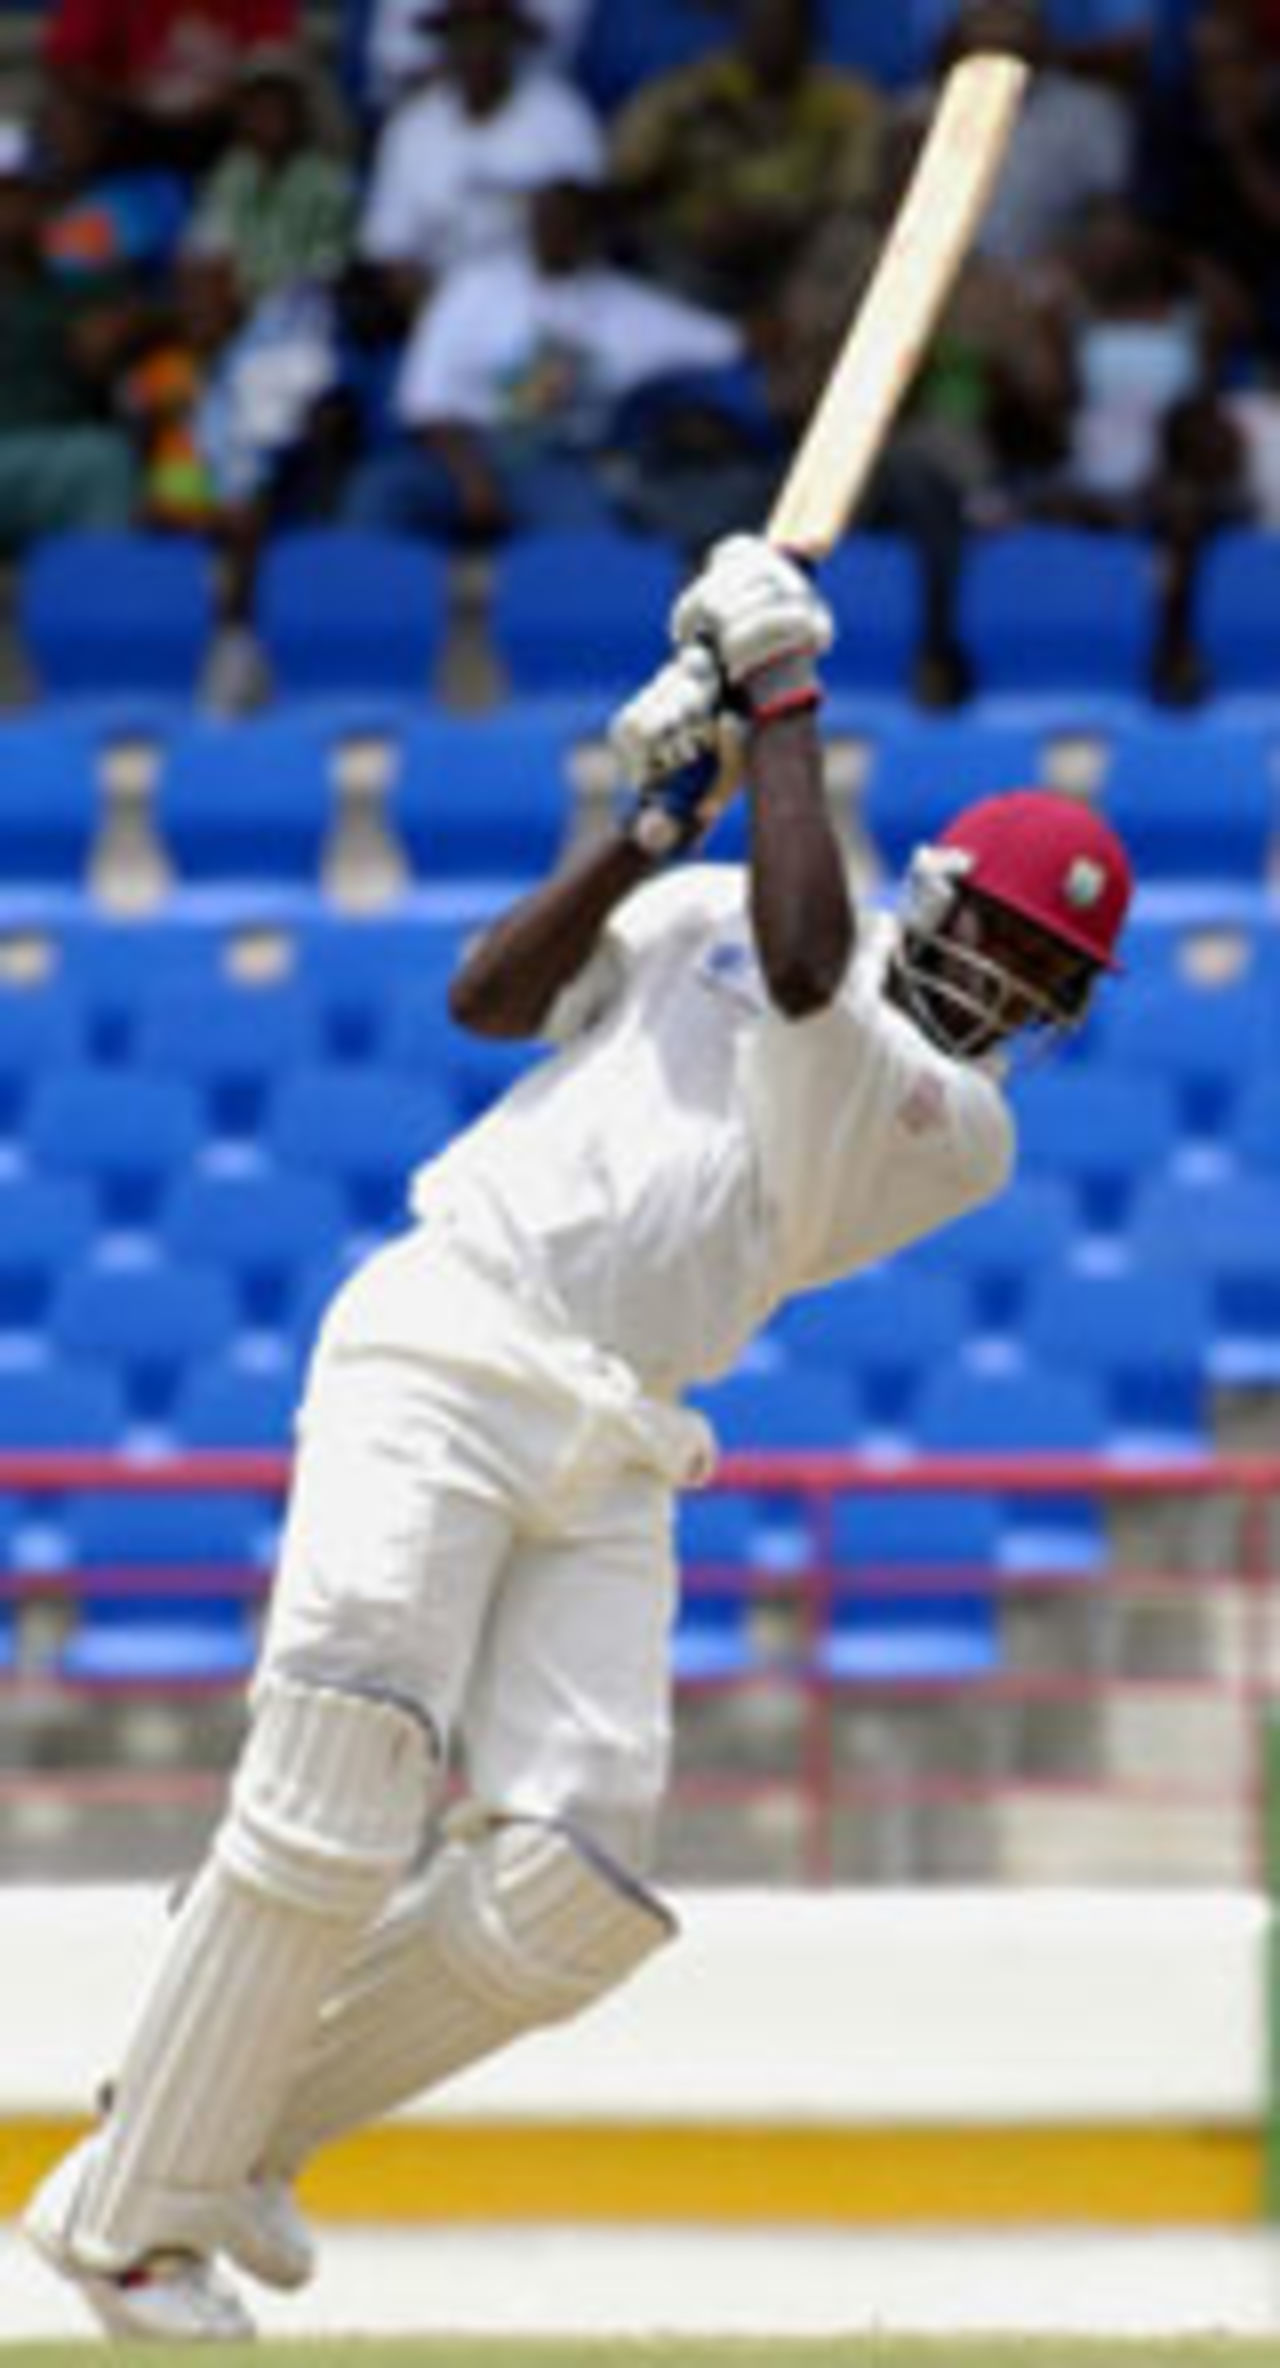 Wavell Hinds battong, West Indies v Sri Lanka, First Test, St. Lucia, June 22, 2003